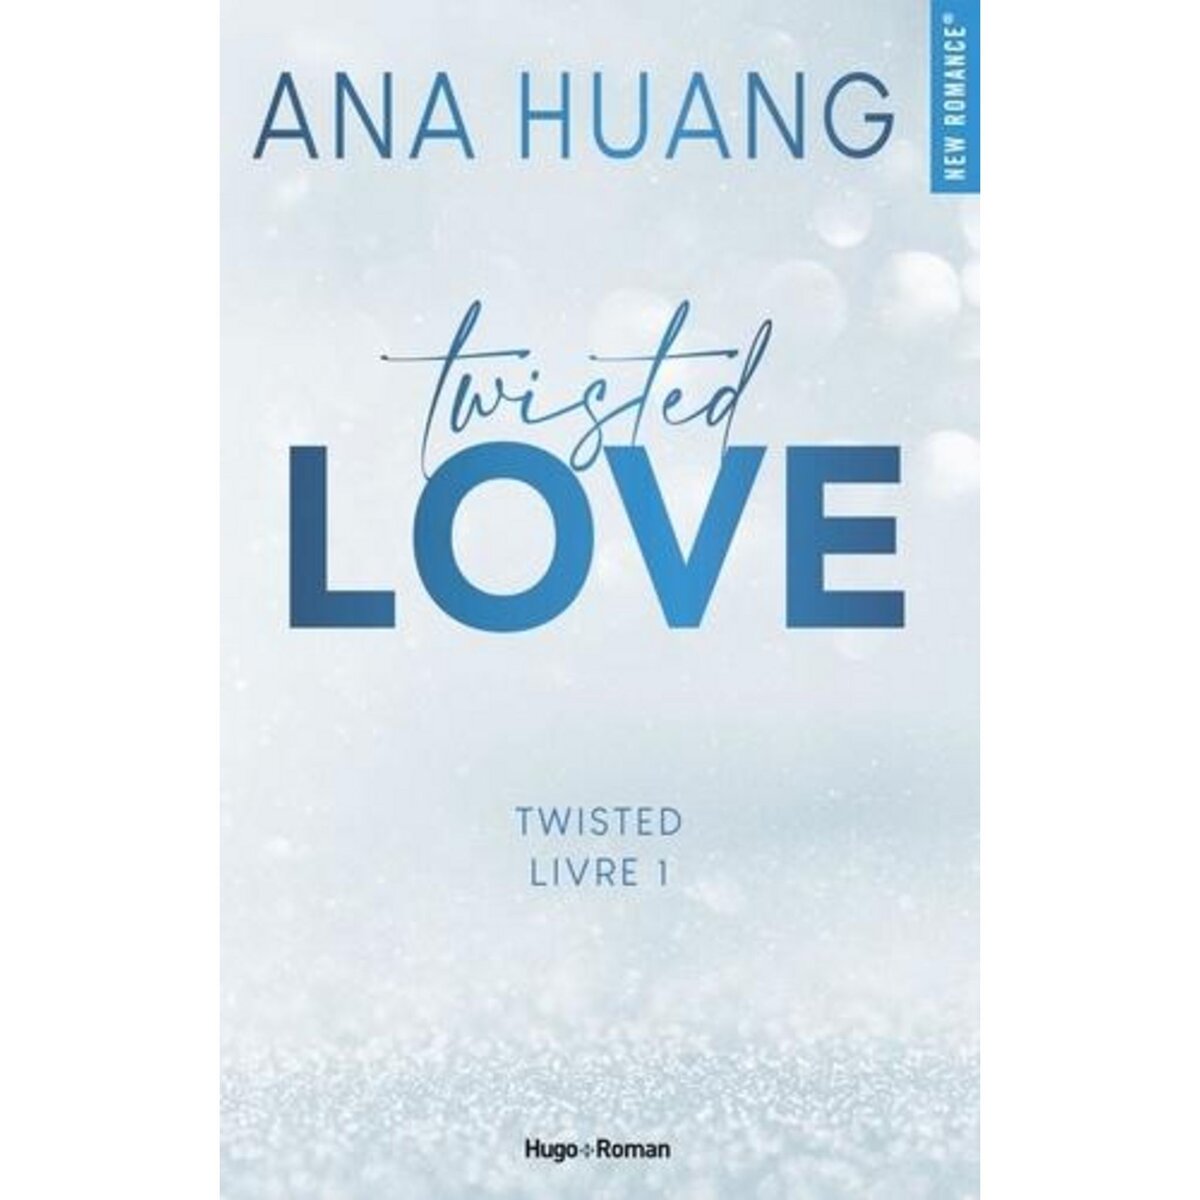  TWISTED TOME 1 : TWISTED LOVE, Huang Ana